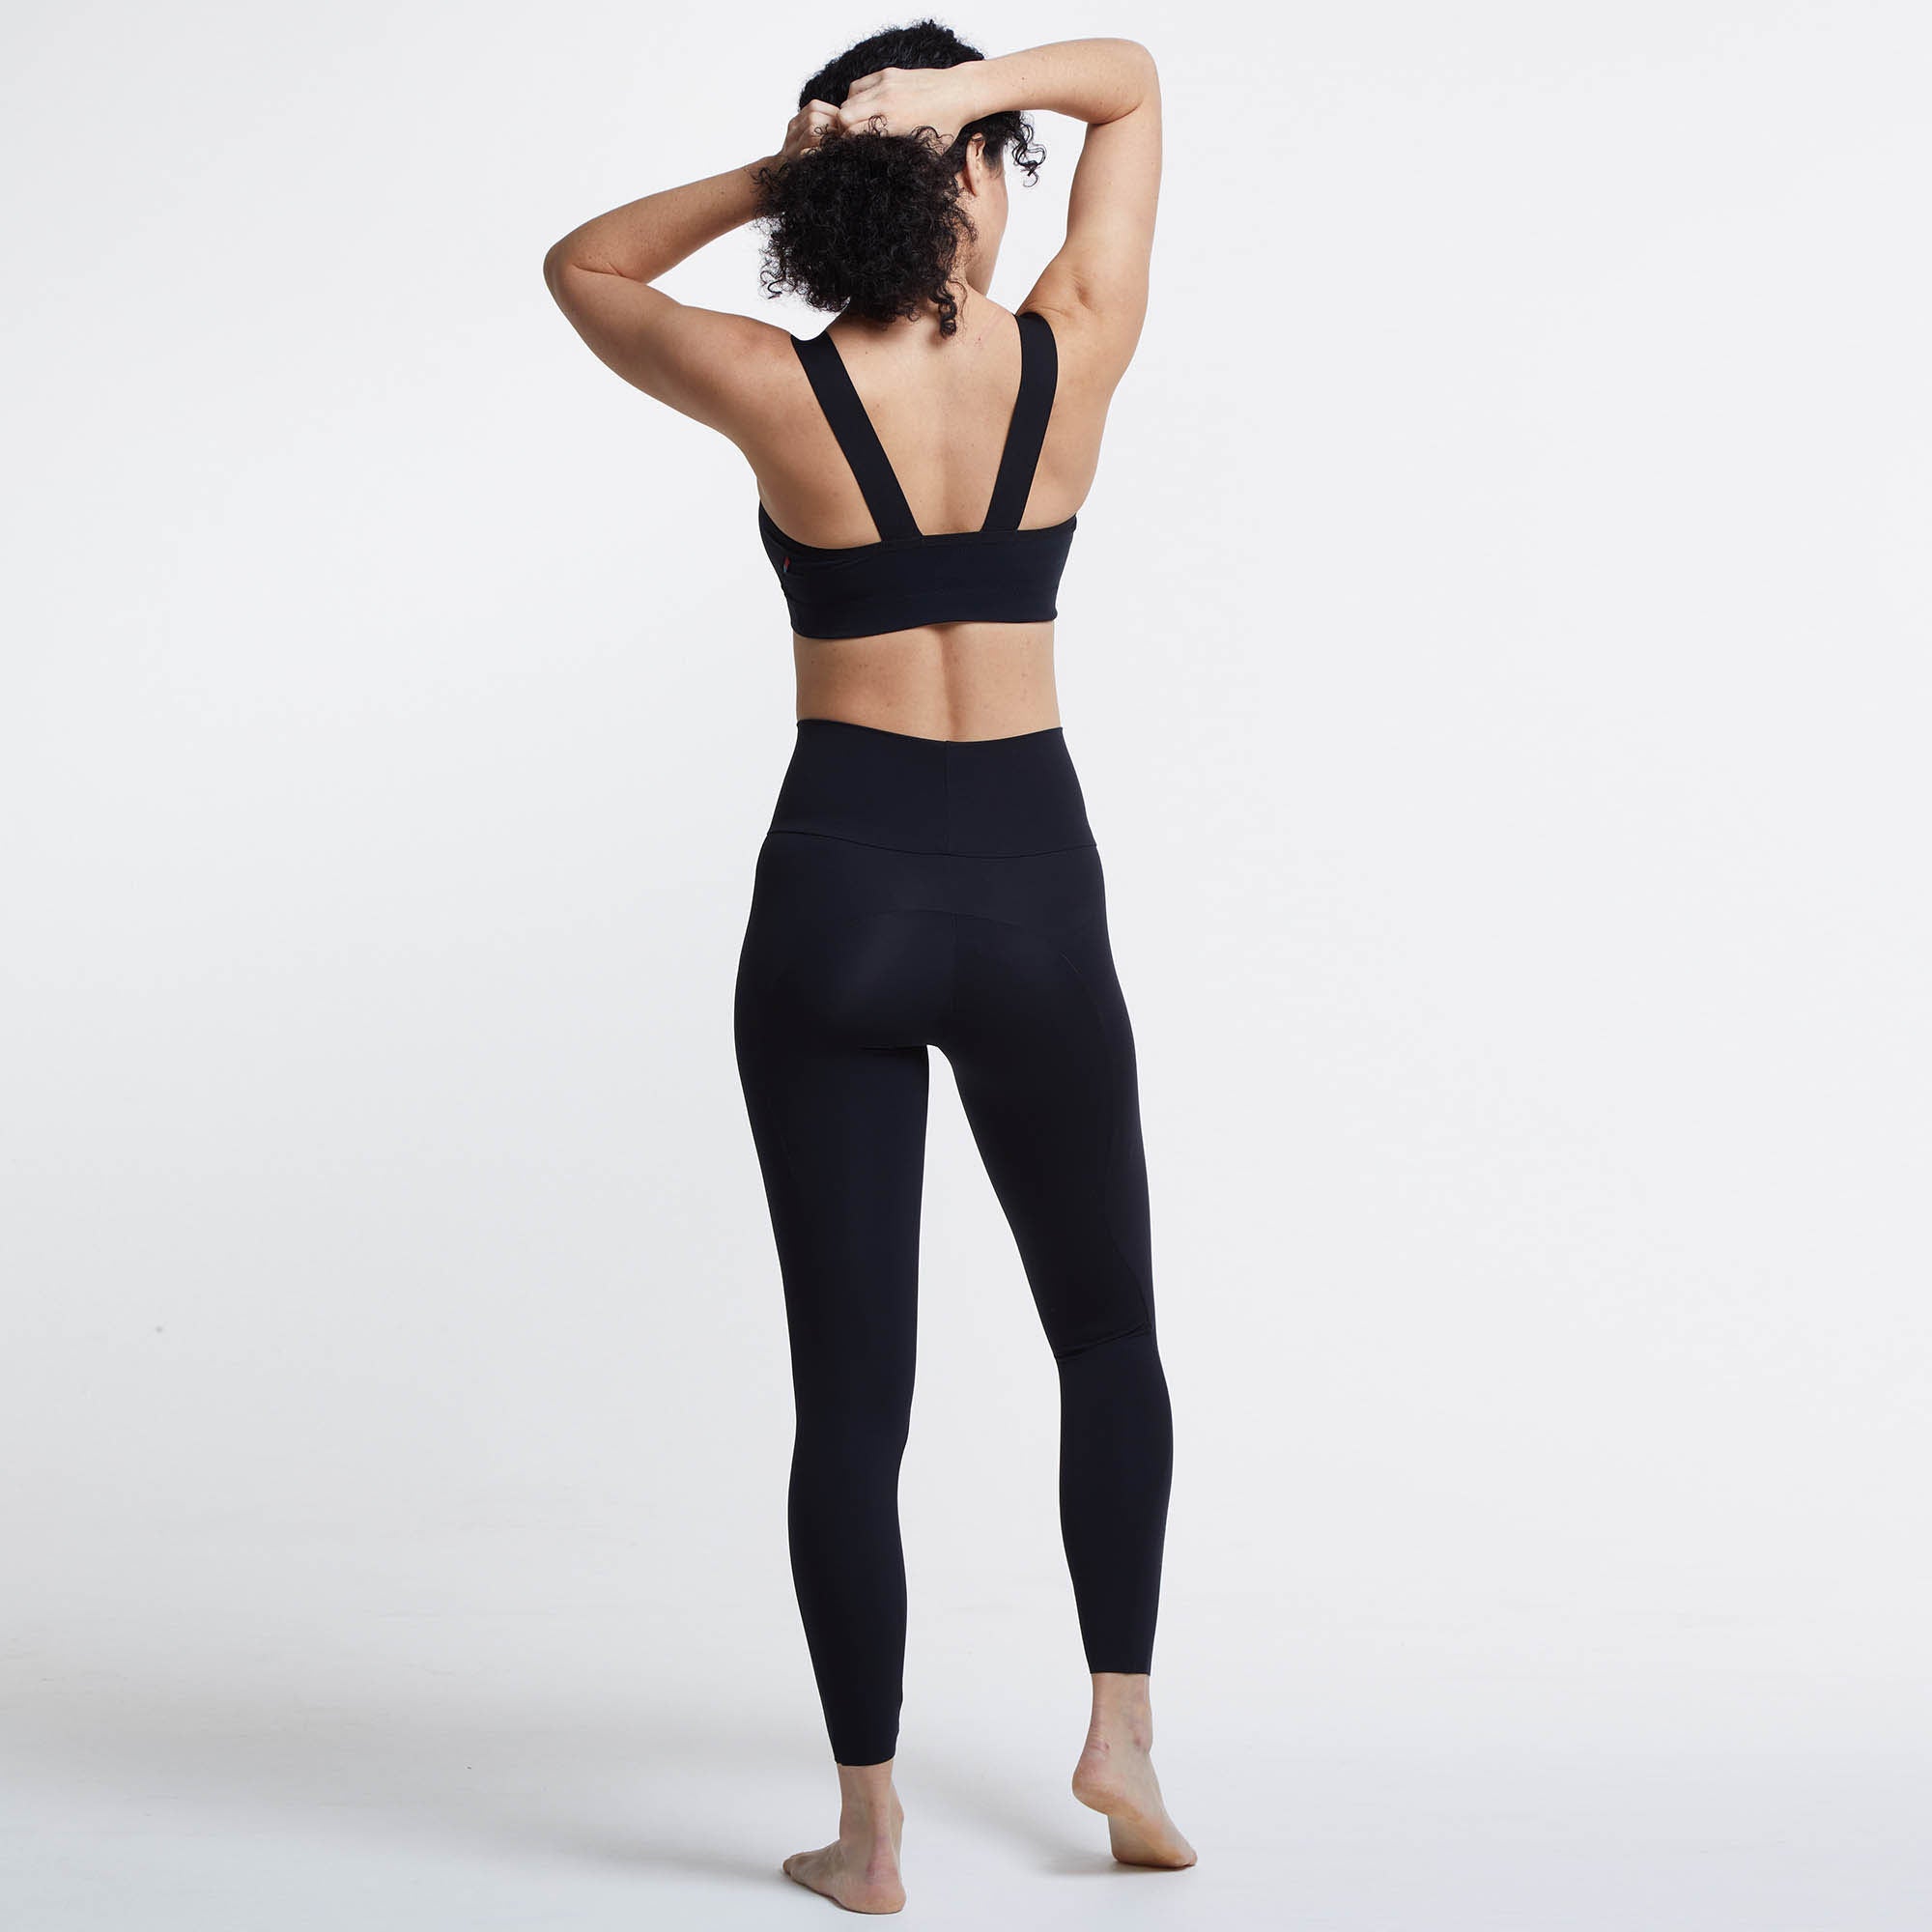 Serious Question: Can You Wear Leggings to Work? - Corporette.com